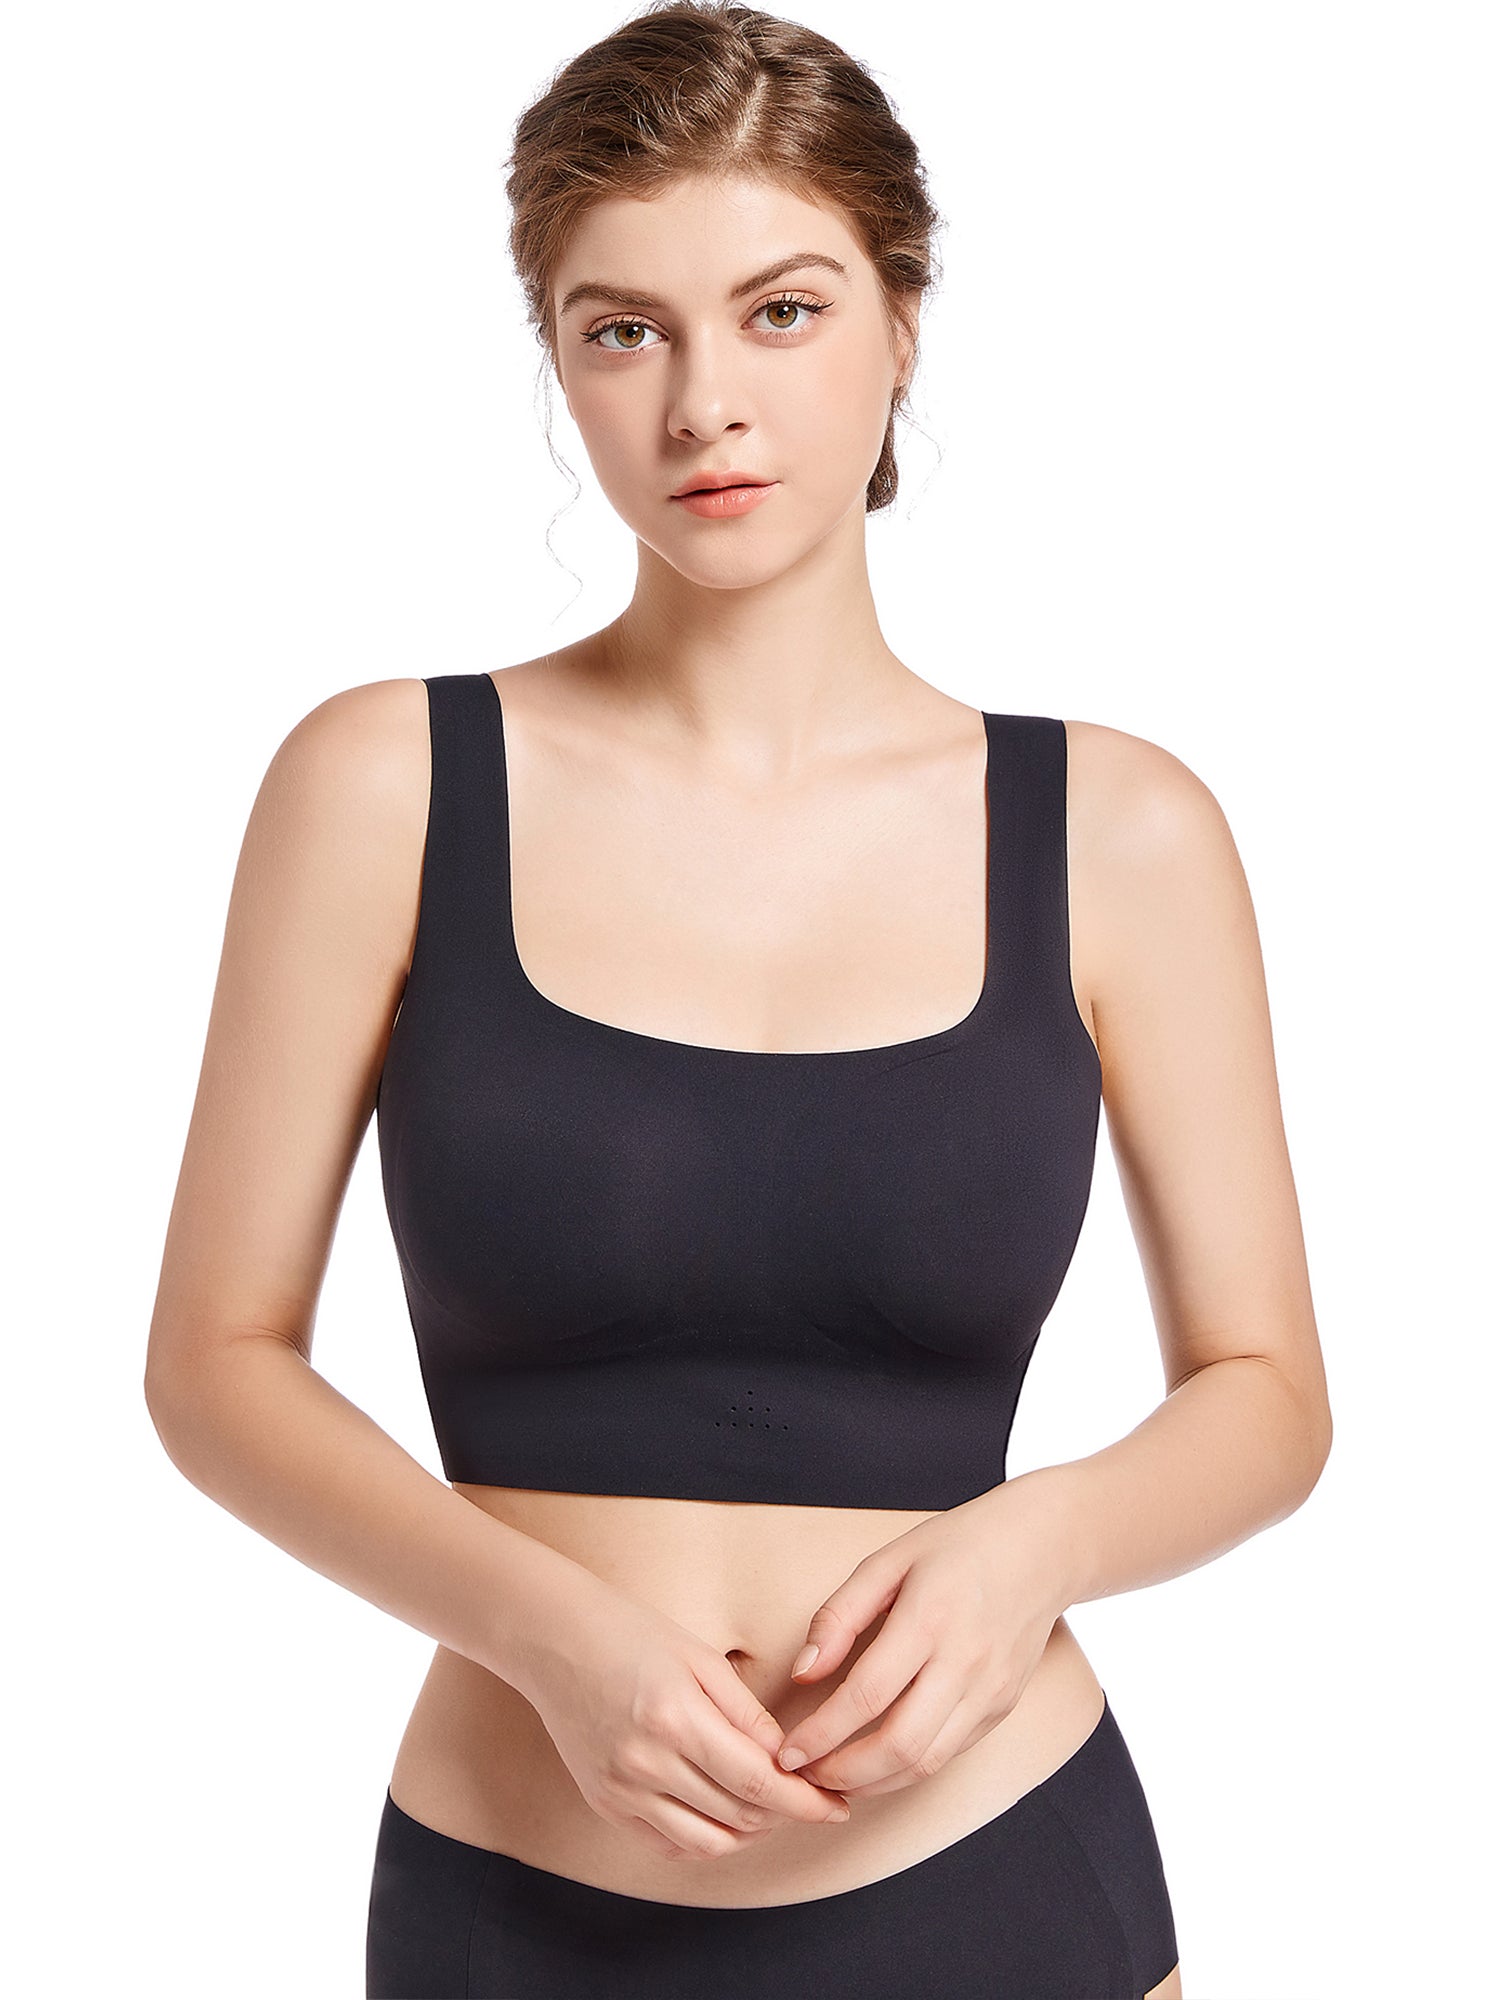 SHAPERX Women‘s High Stretch Wireless Bra with Scoop Longline Design and Removable Pads SHAPERX